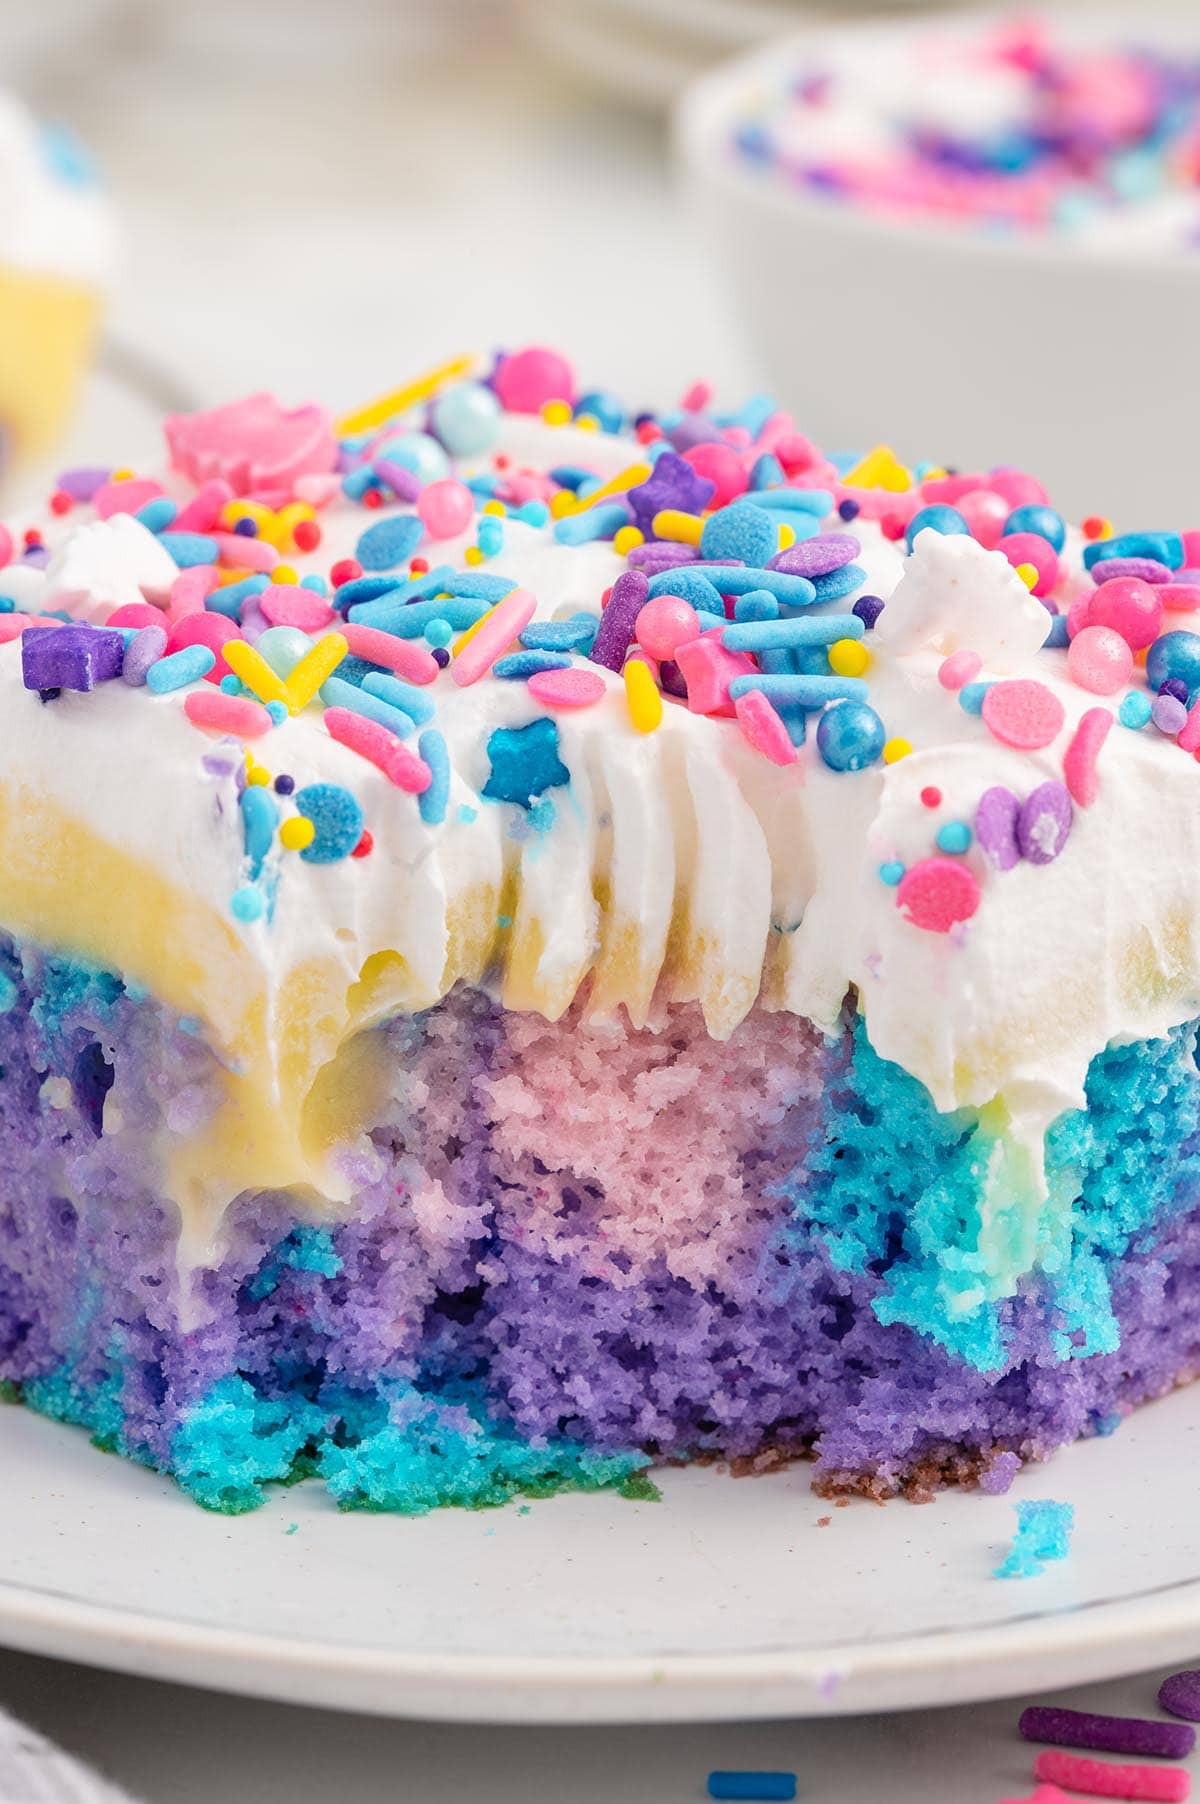 bitten Unicorn Poke Cake on the plate with unicorn candy sprinkles.